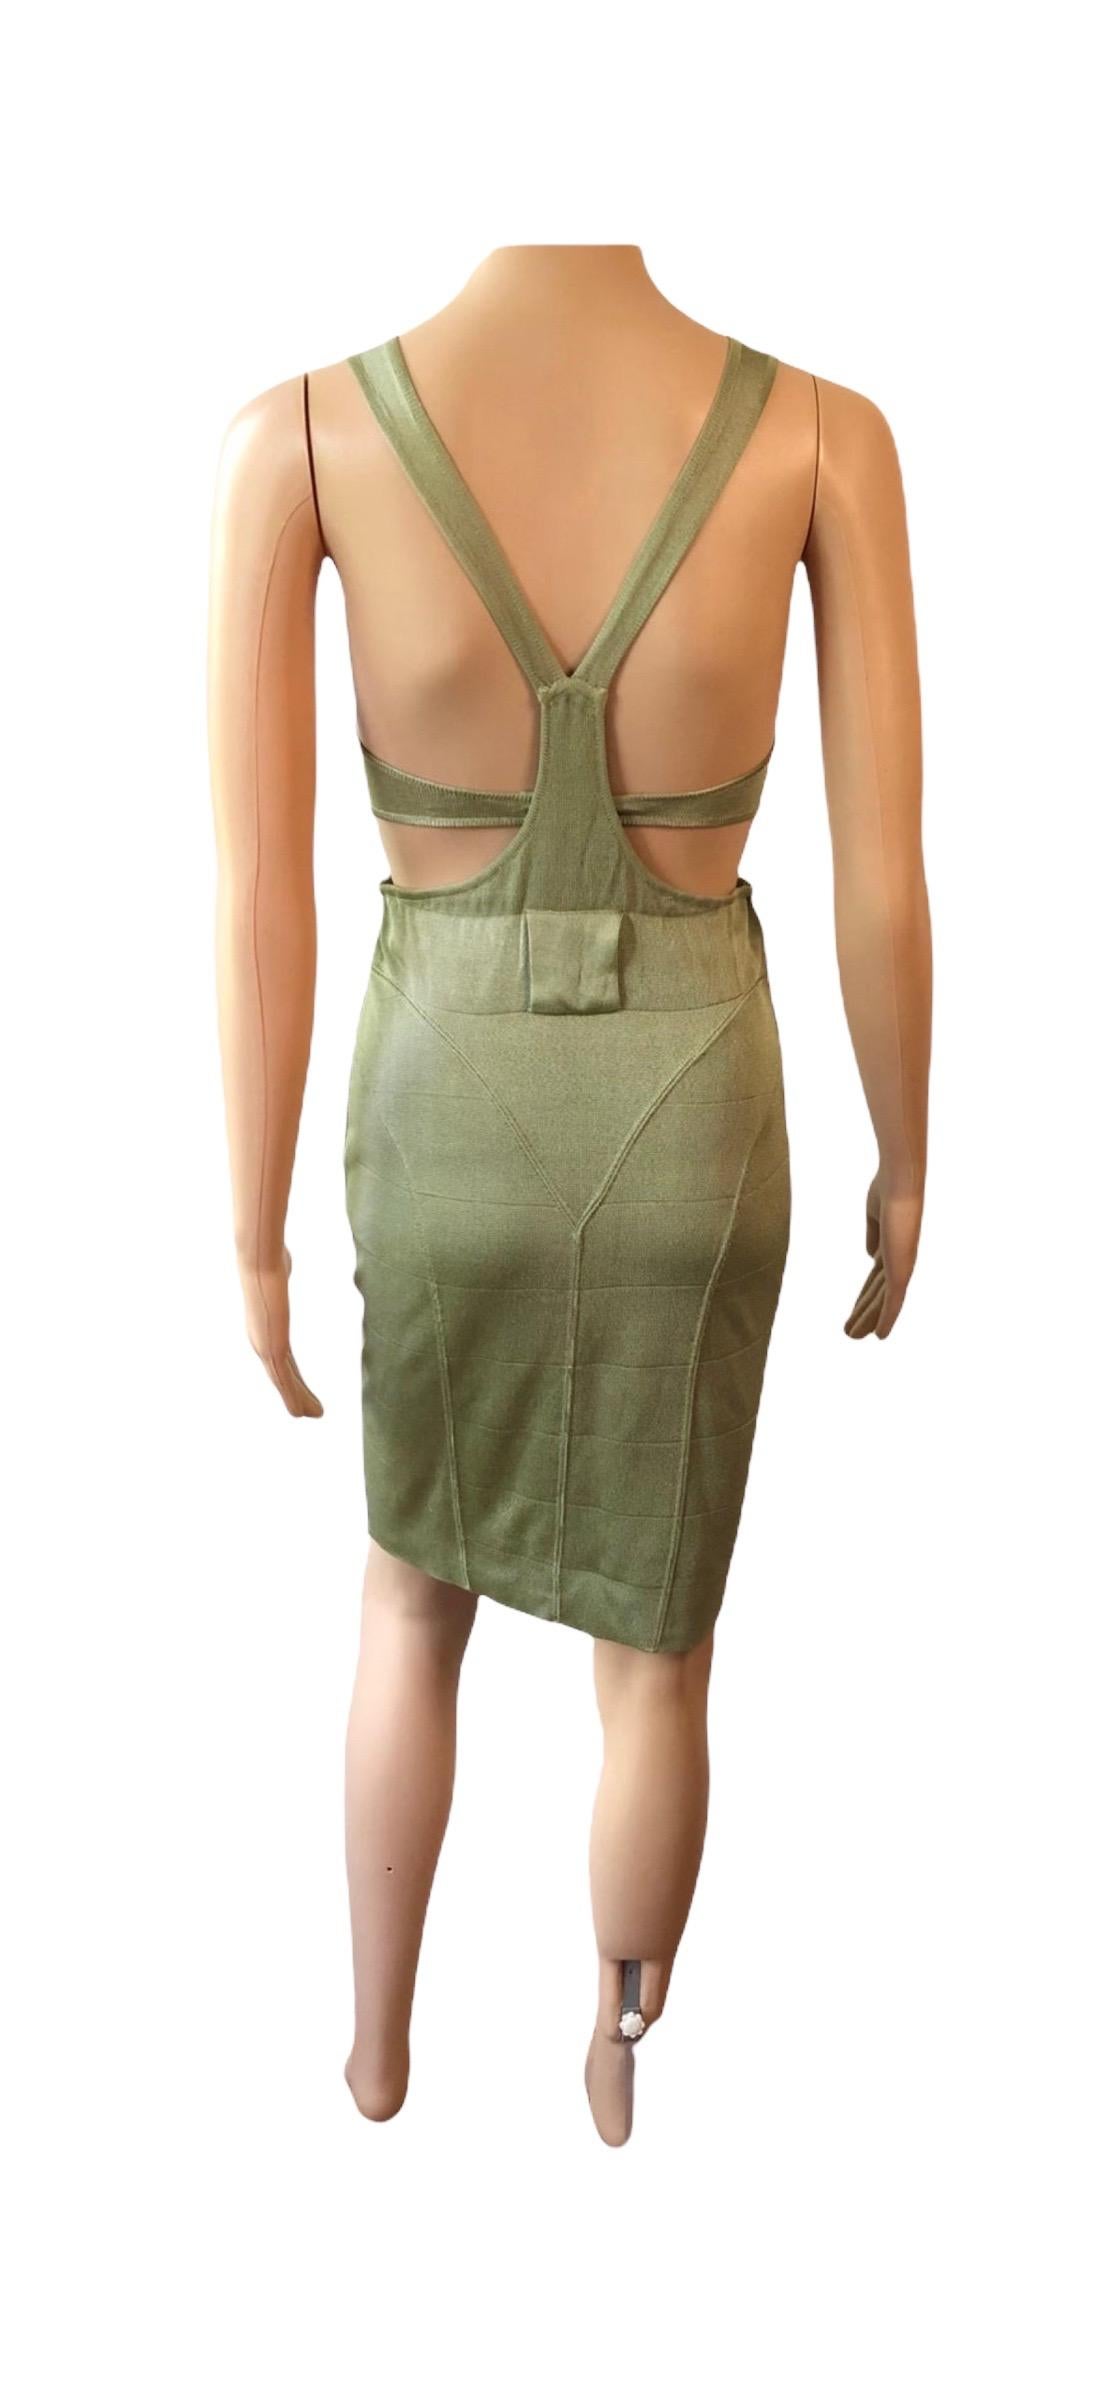 Azzedine Alaia S/S 1985 Vintage Plunged Cutout Bodycon Green Dress For Sale 6